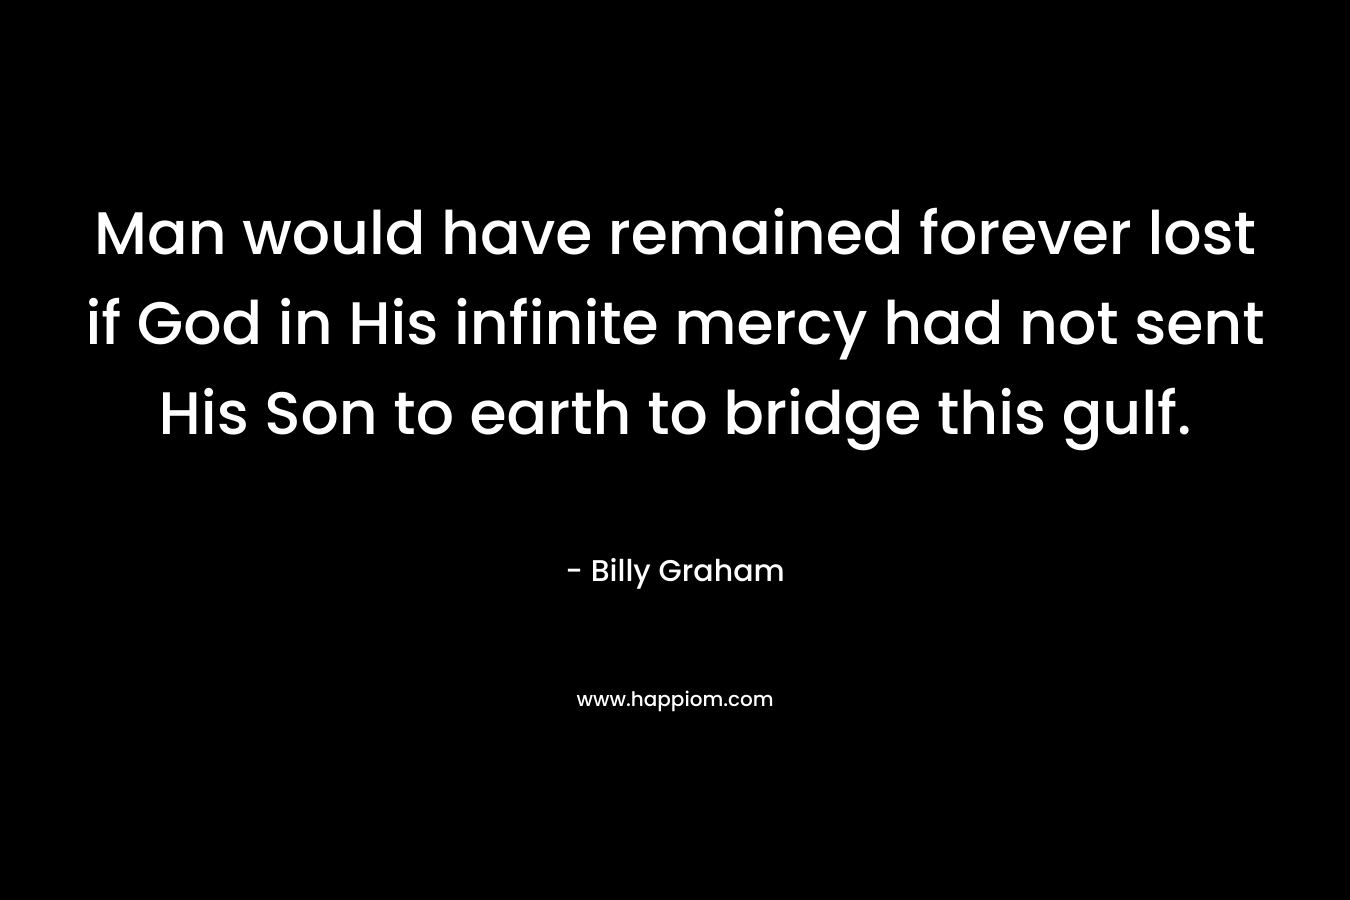 Man would have remained forever lost if God in His infinite mercy had not sent His Son to earth to bridge this gulf.